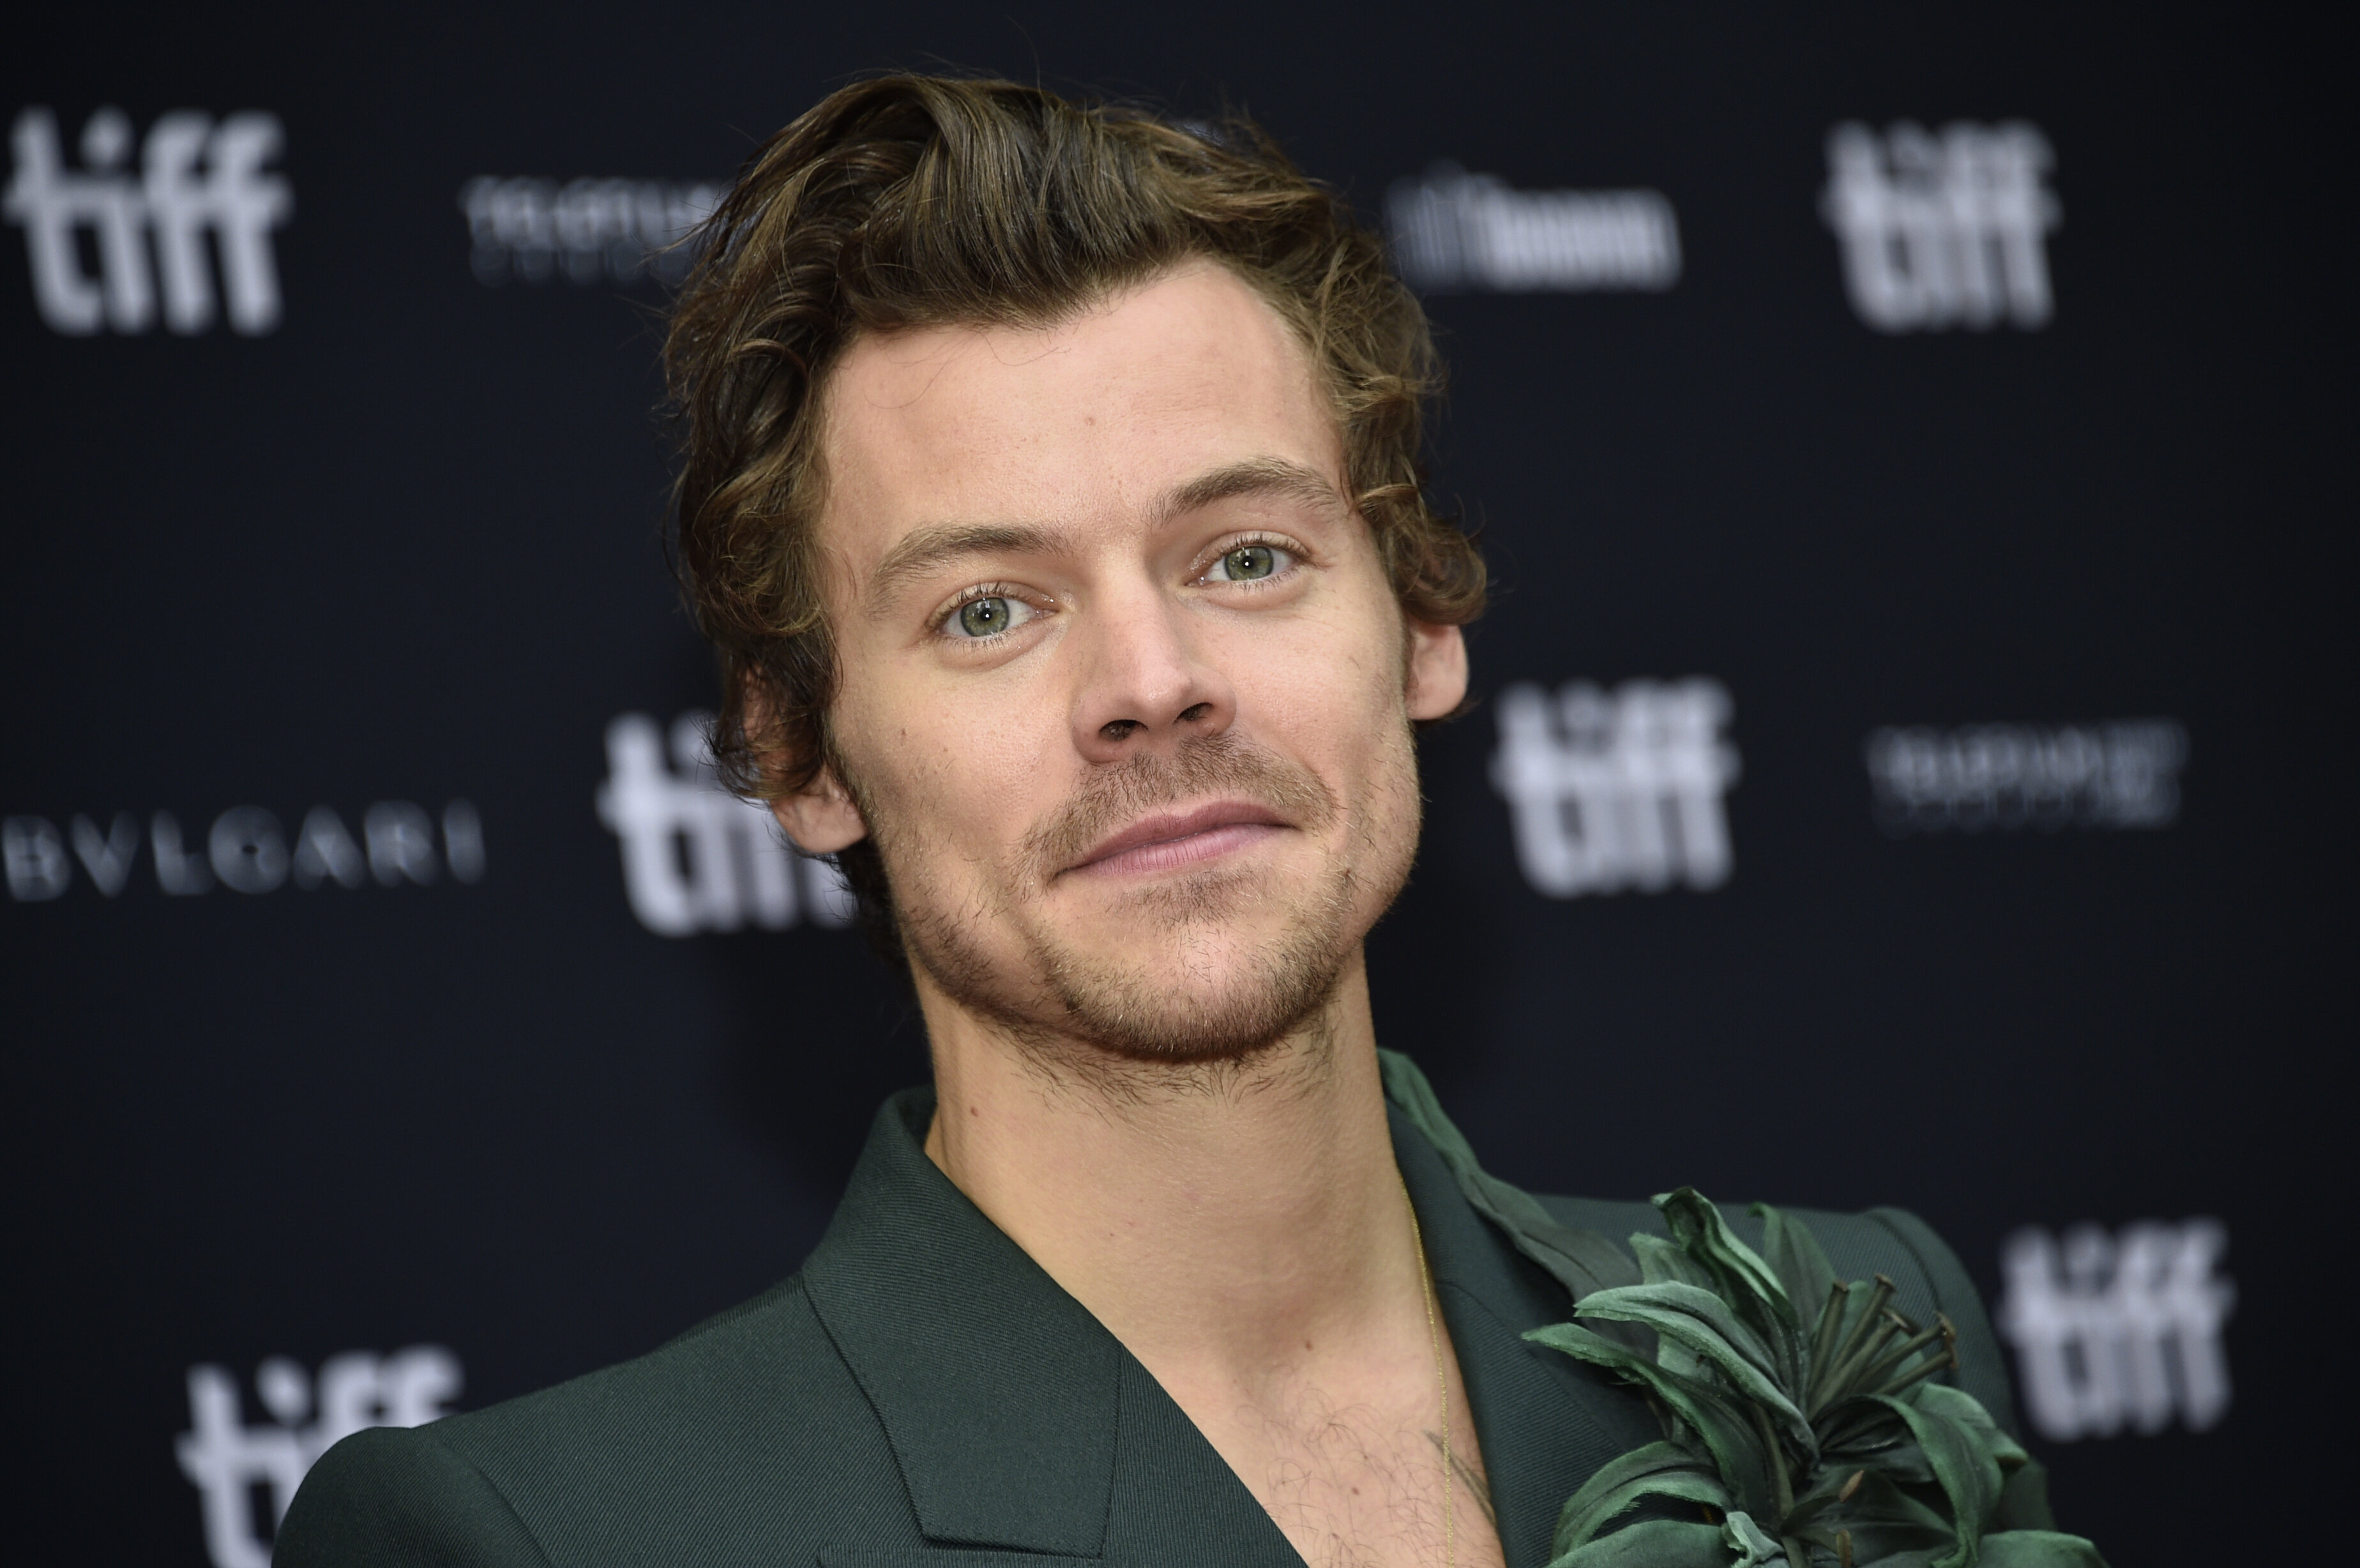 Harry Styles' Hair Photos: The Evolution of His Hairstyles